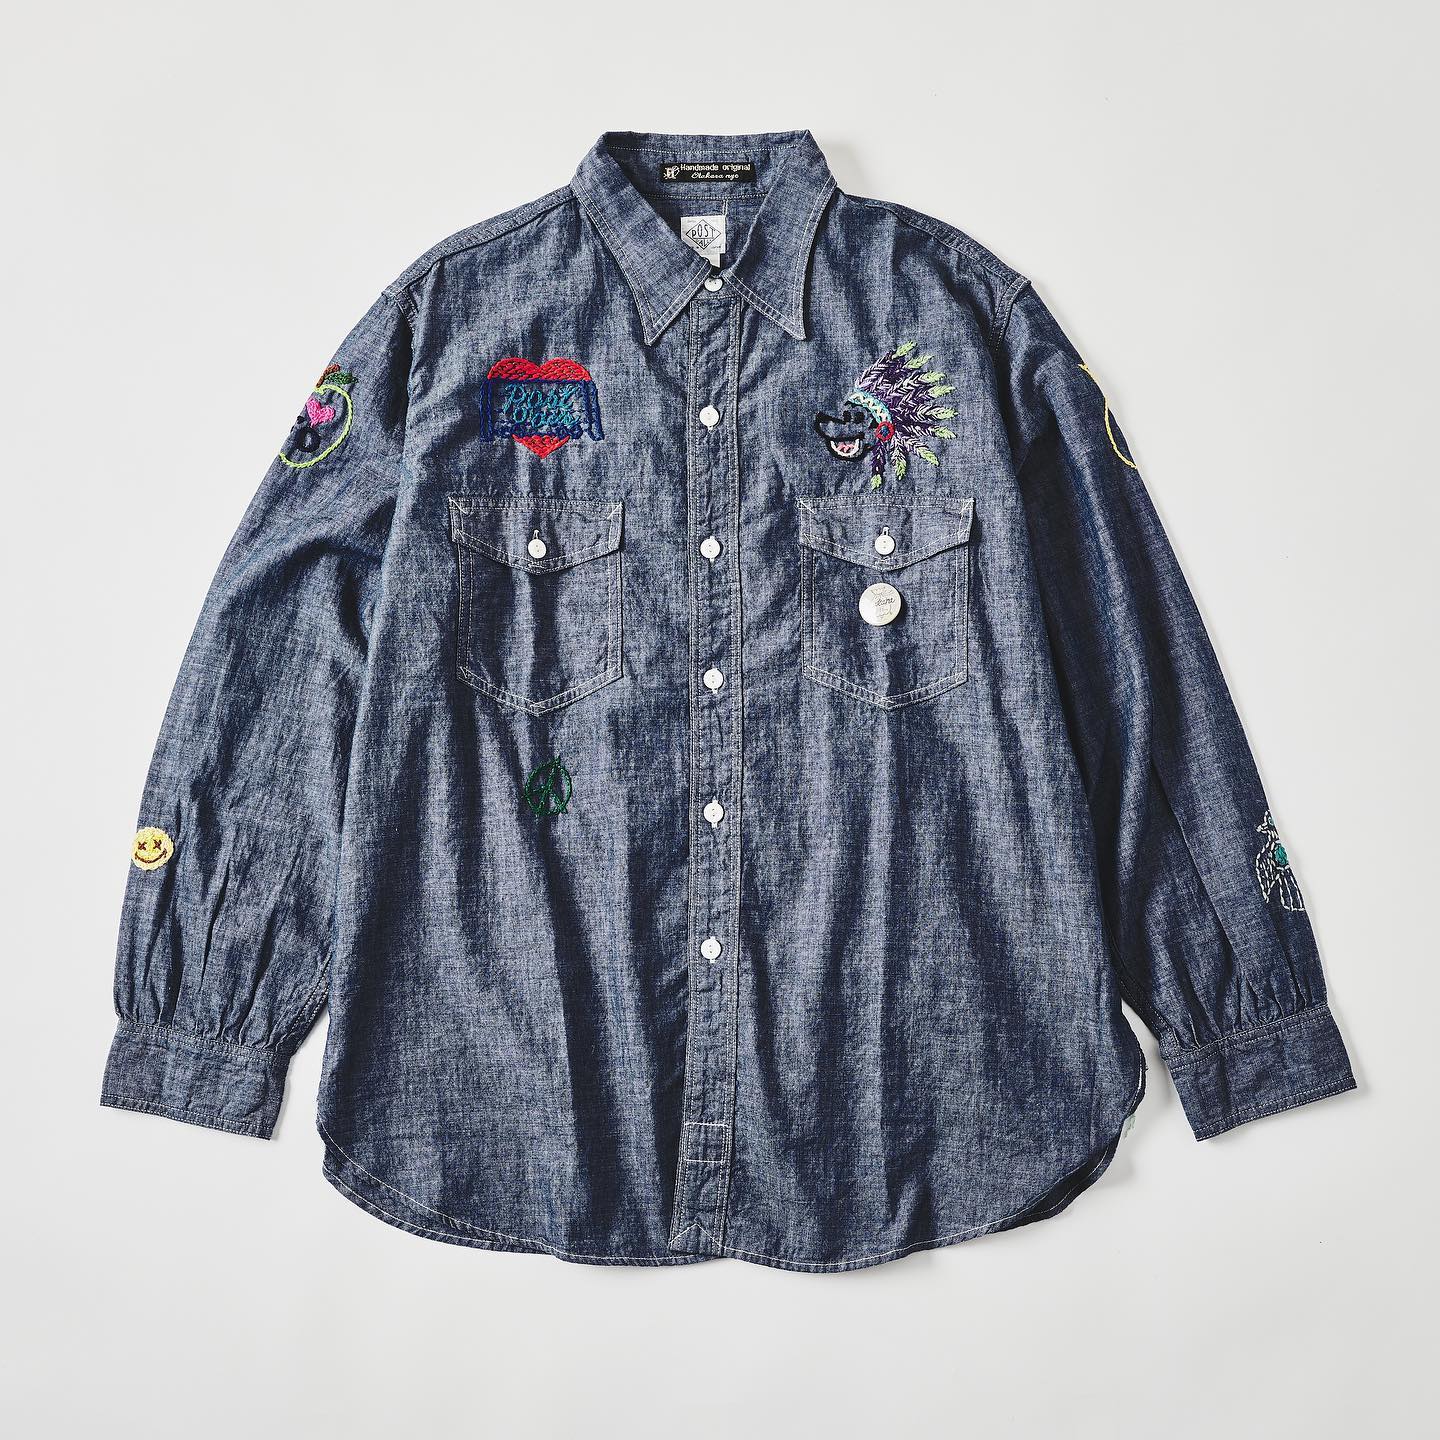 Eight Brands Making Unique, One-of-One Shirts For The Summer